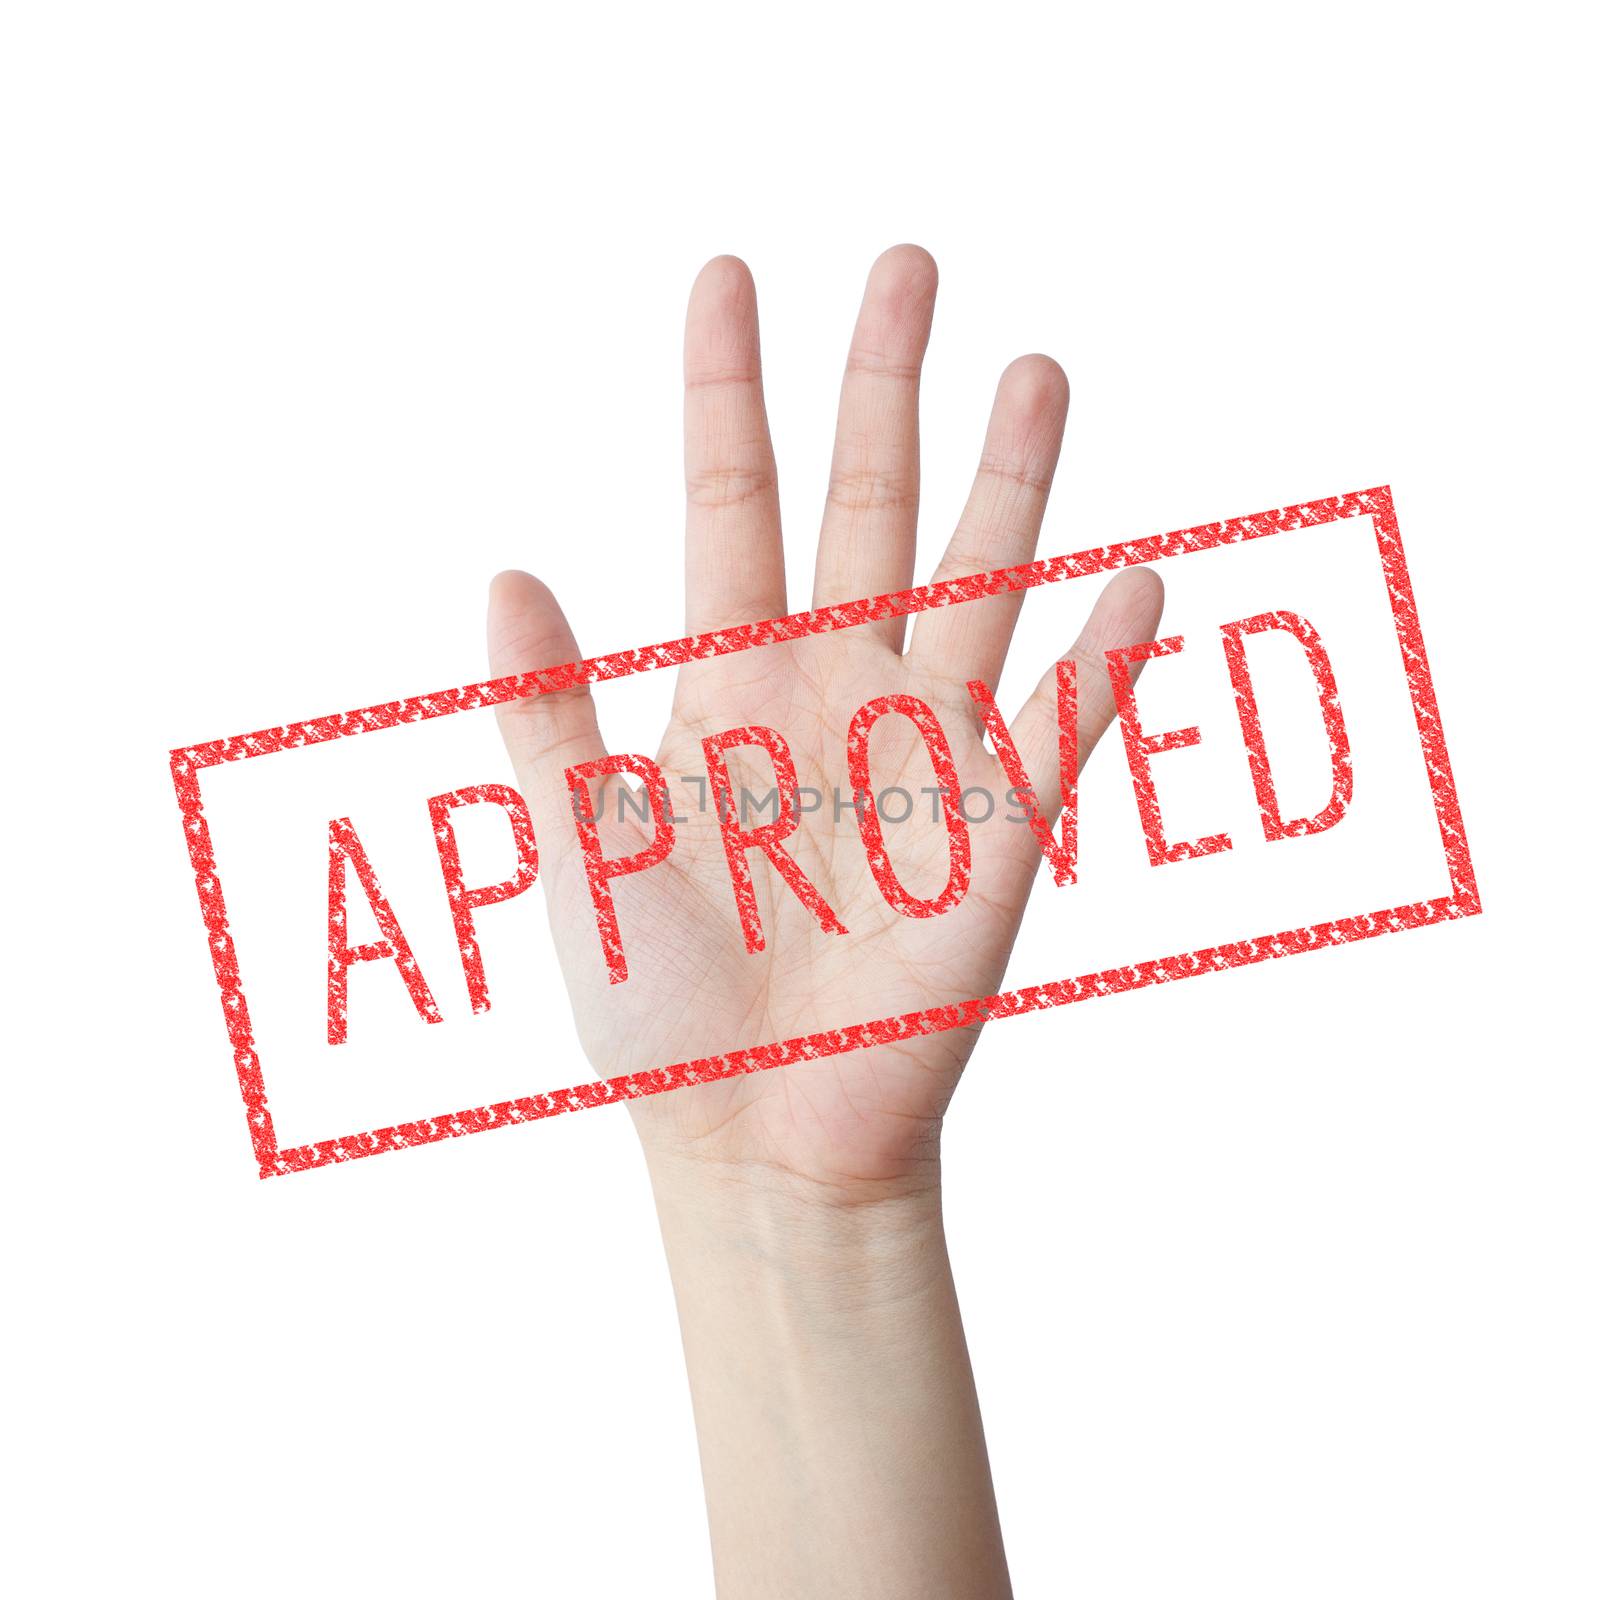 Approved red stamp hand concept isolated white background by 2nix